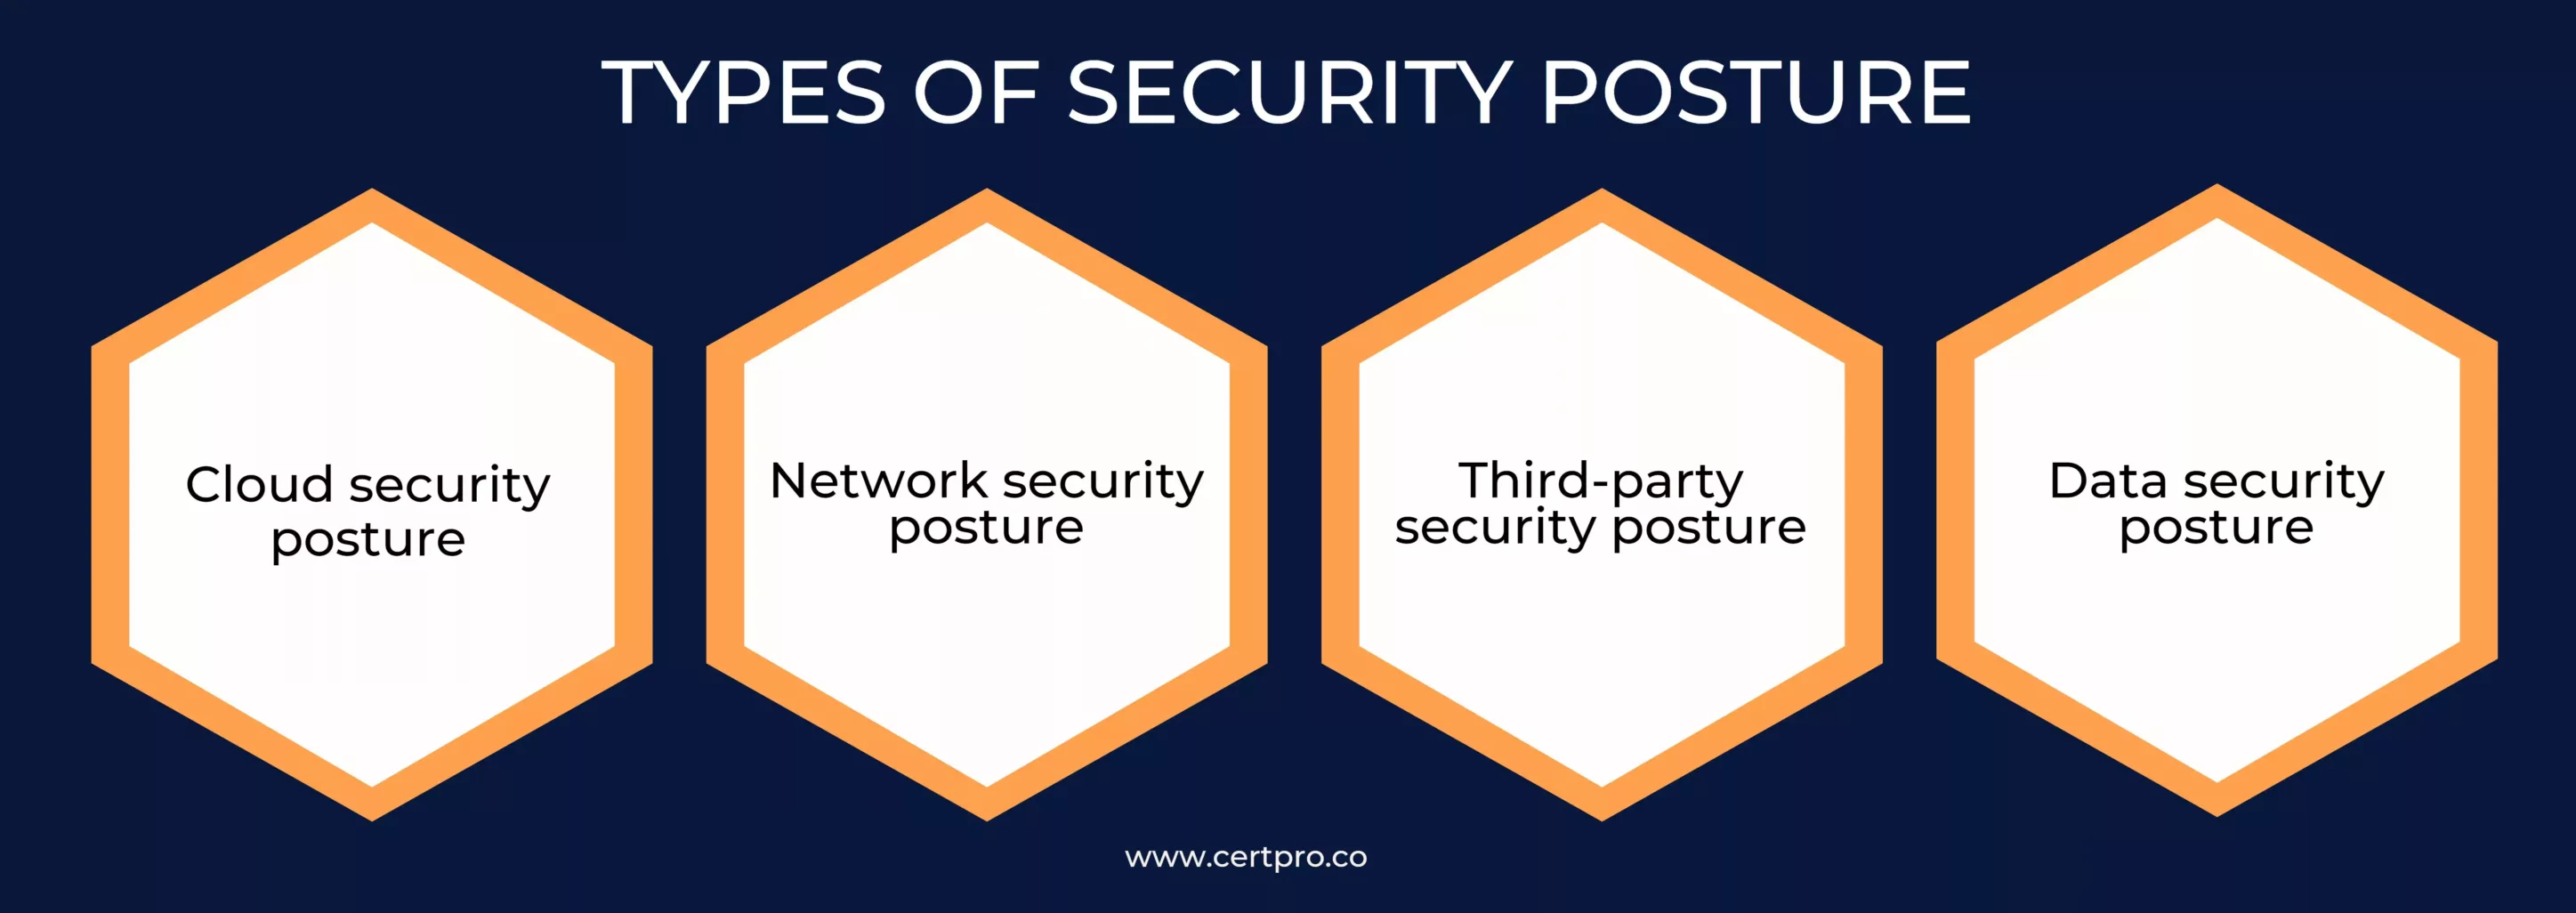 TYPES OF SECURITY POSTURE